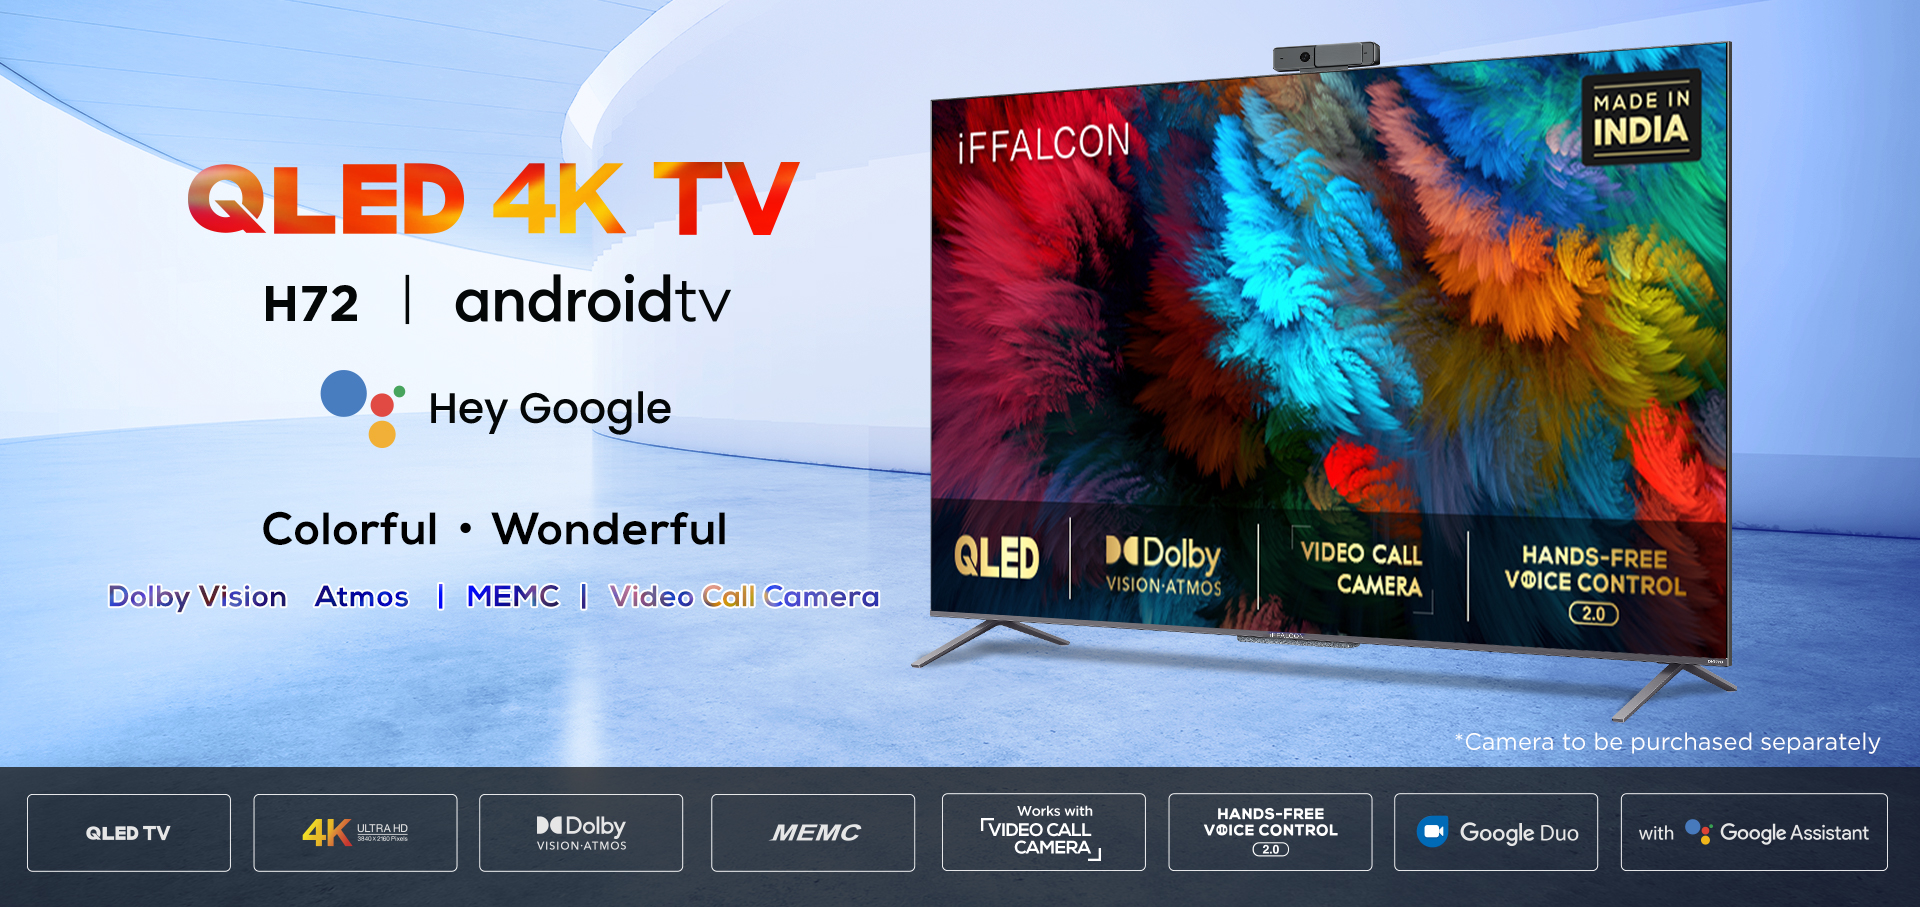 iFFALCON H72 QLED 4K Android TV